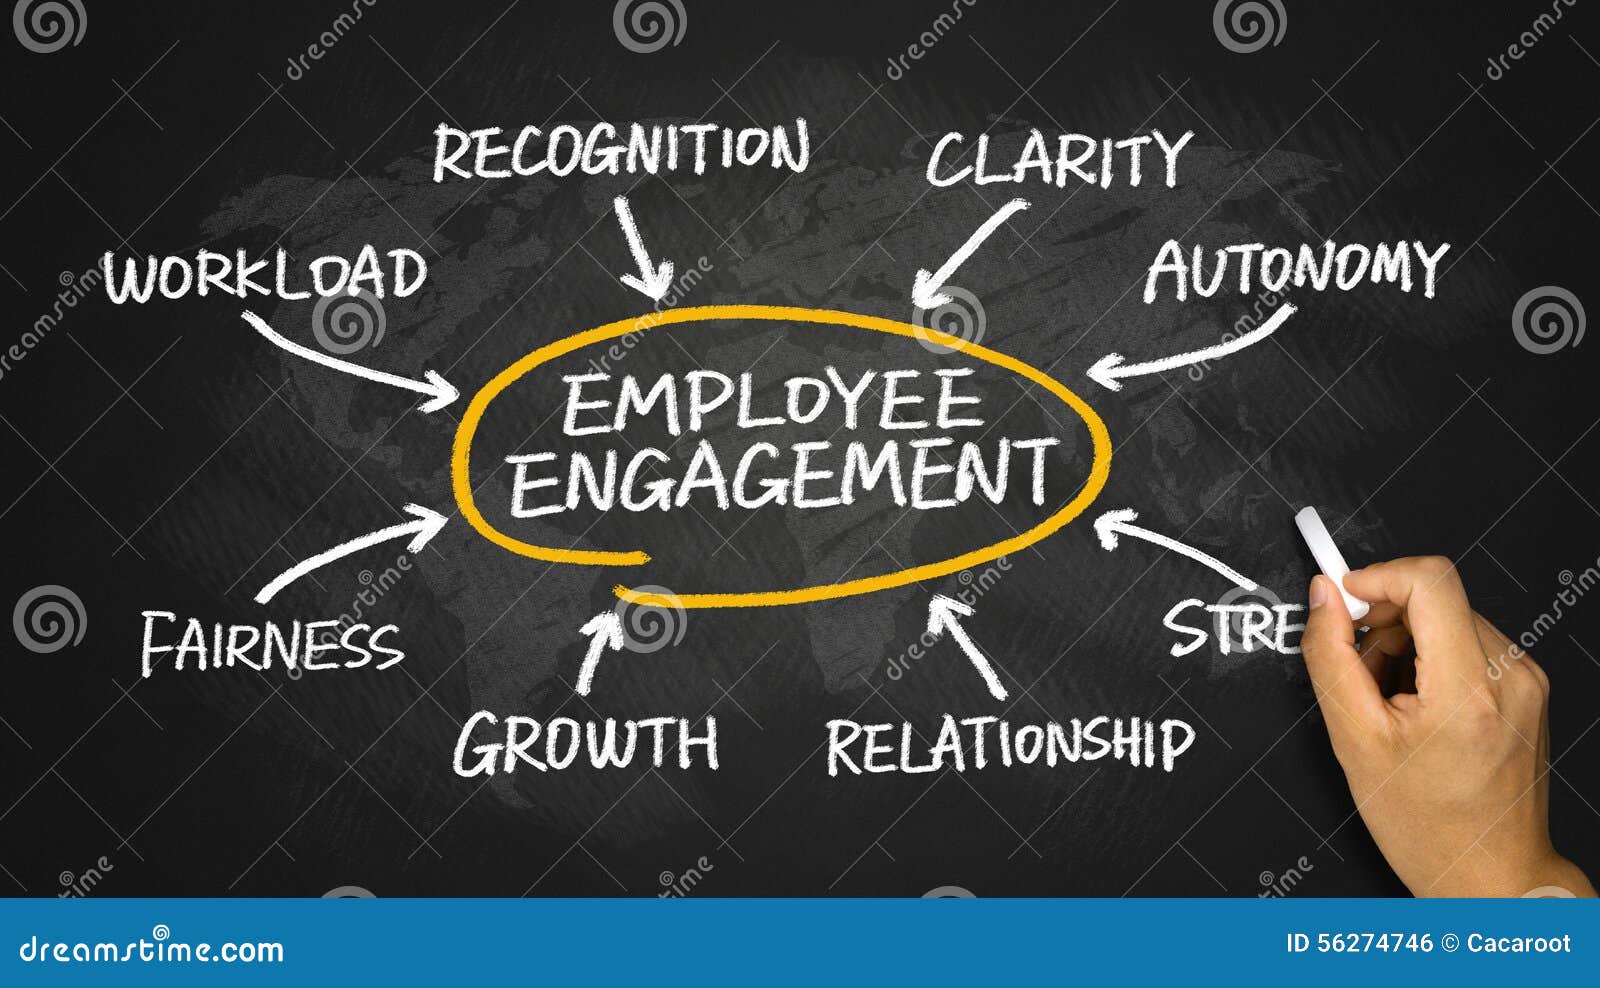 employee engagement diagram hand drawing on chalkboard